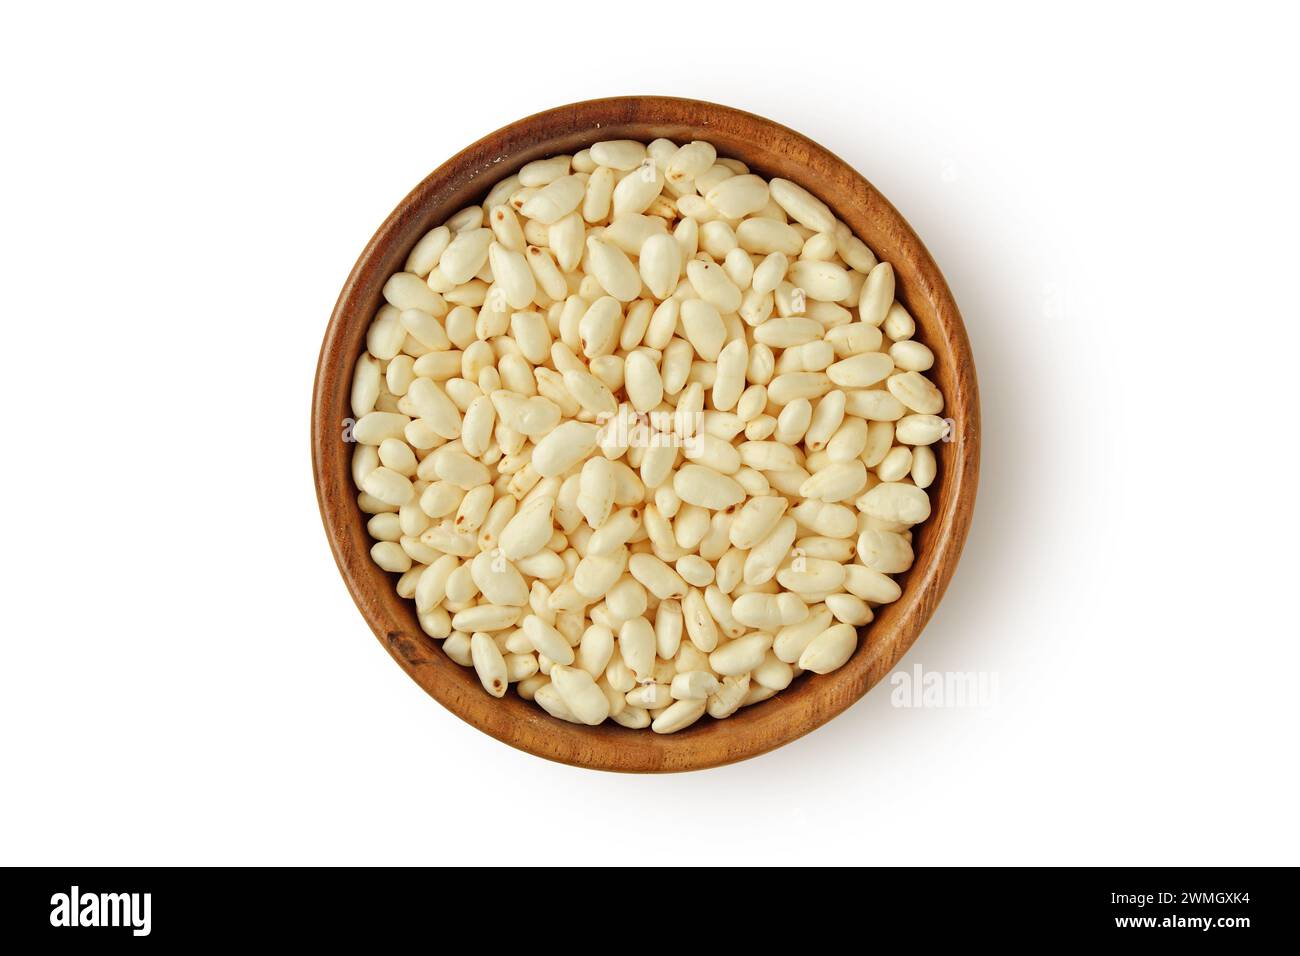 Puffed rice in wooden bowl on white background Stock Photo